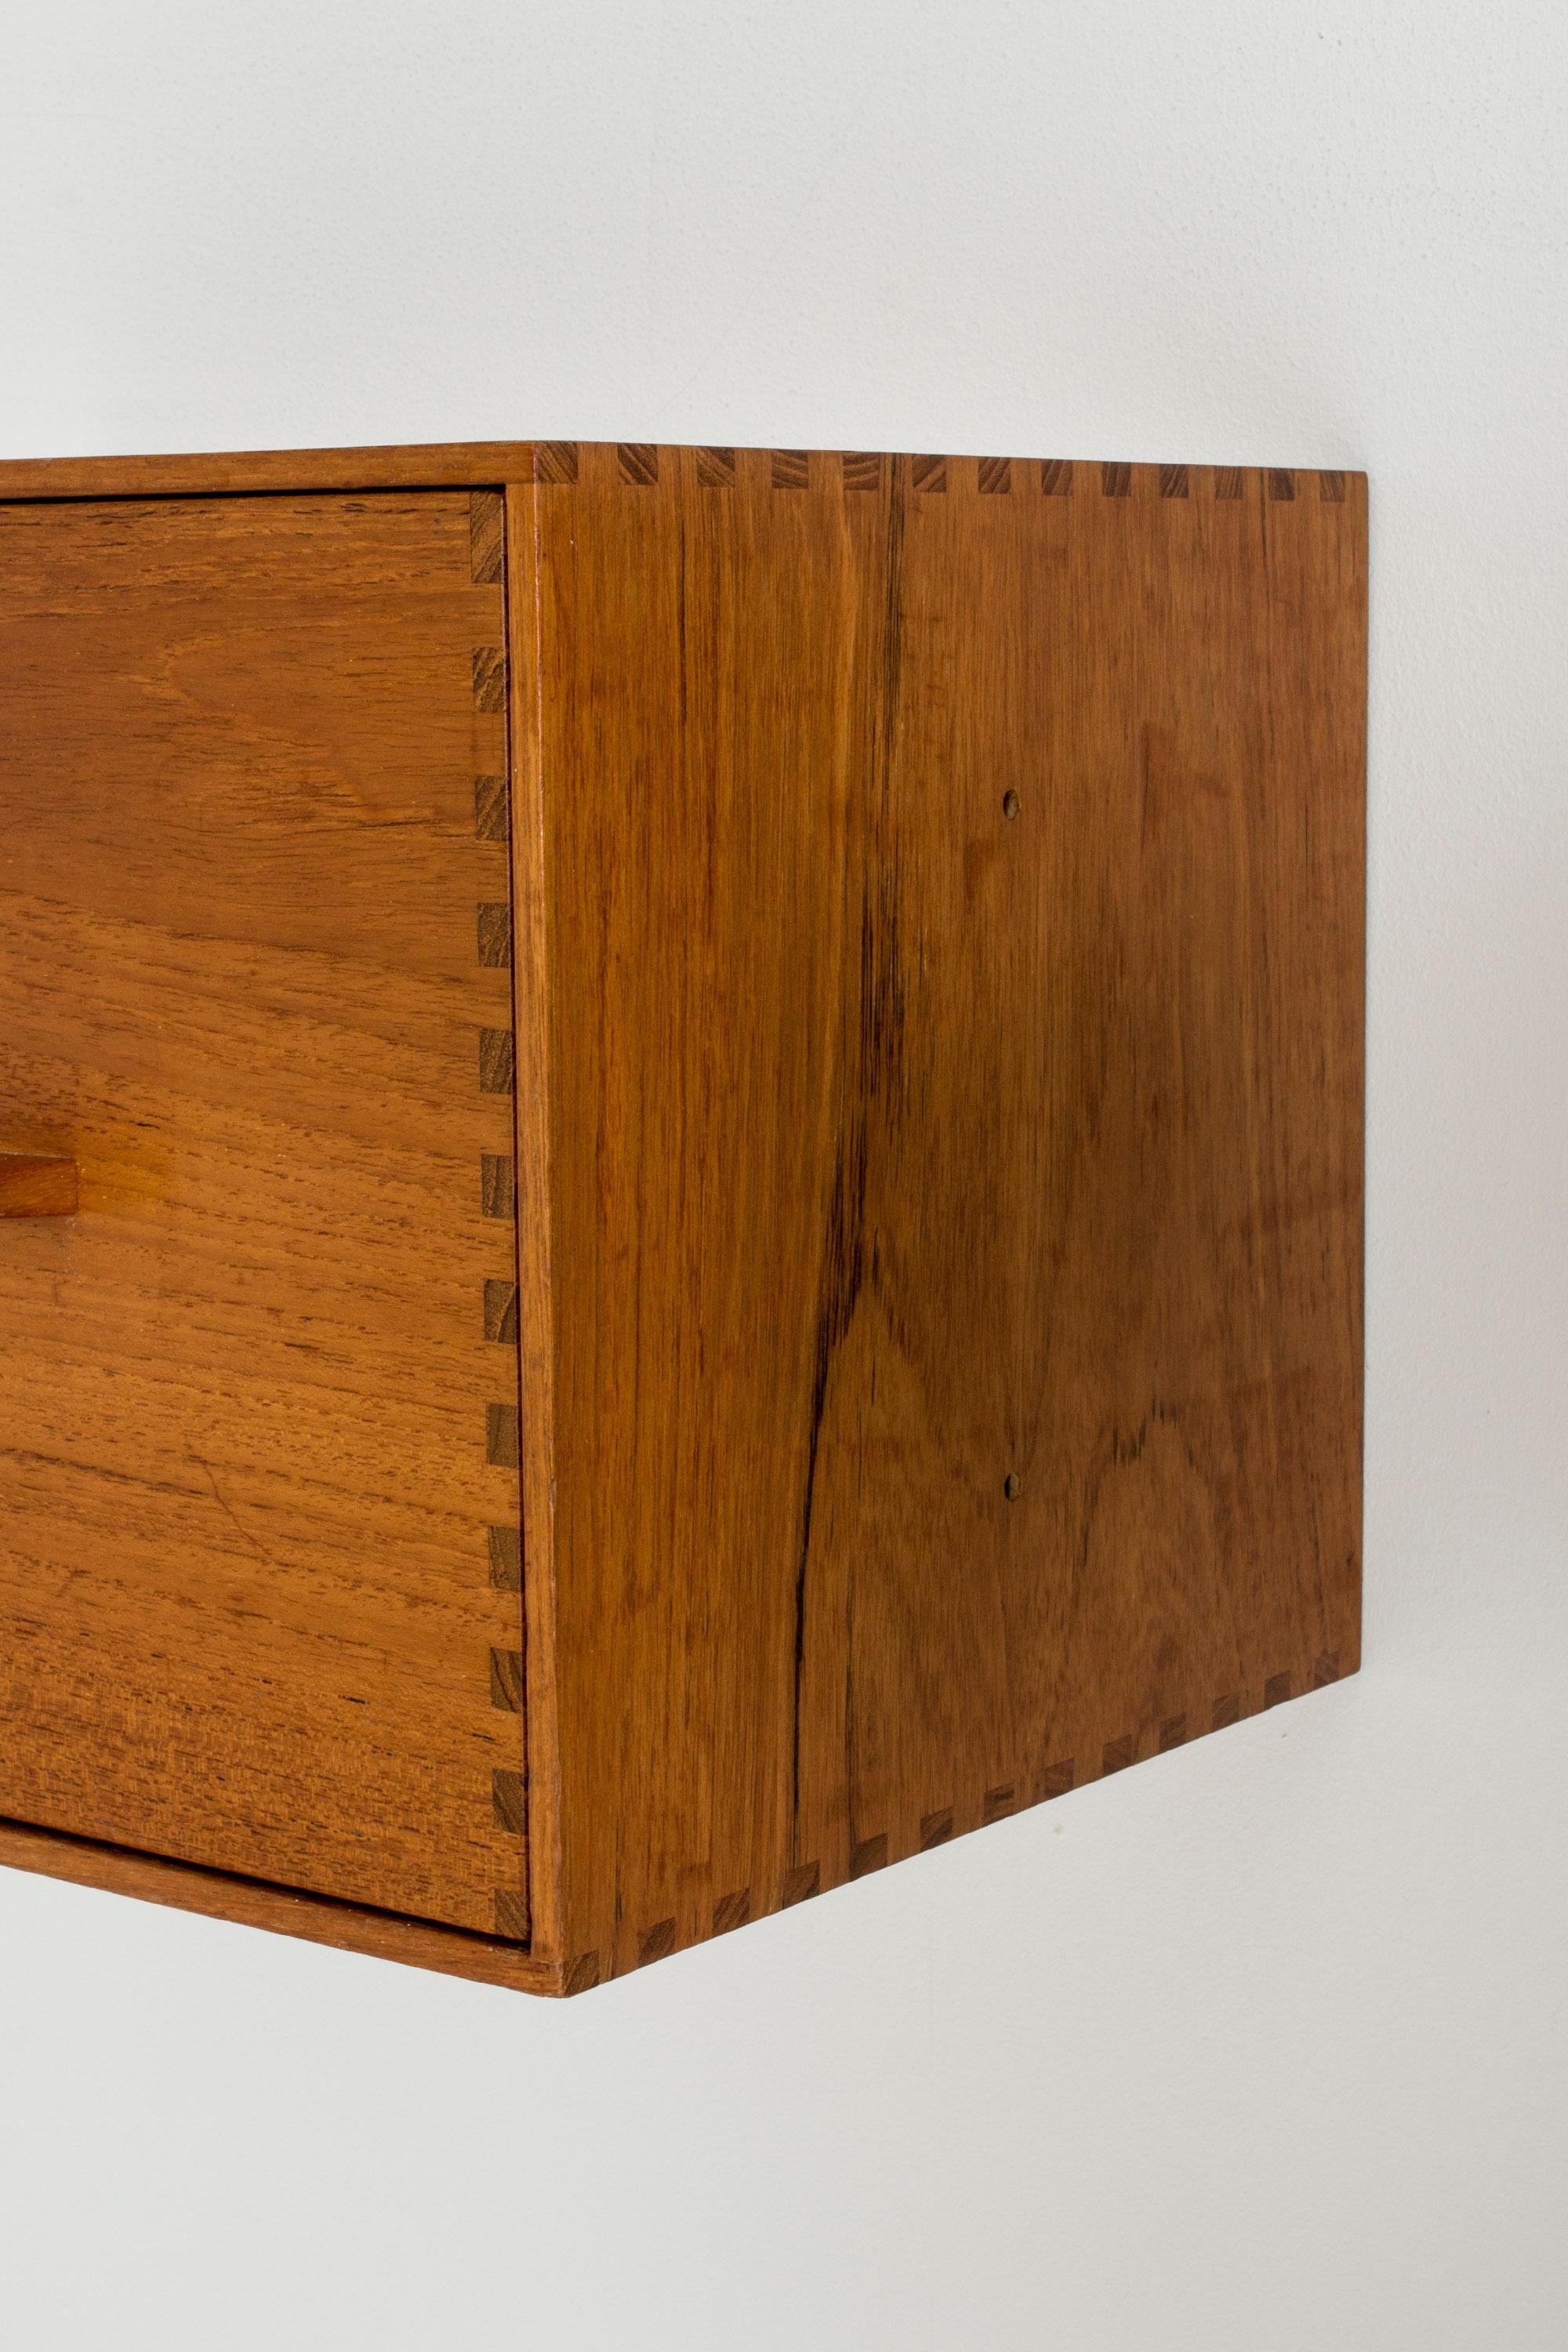 Mid-20th Century Pair of Teak Wall-Mounted Shelves by Uno and Östen Kristiansson for Luxus